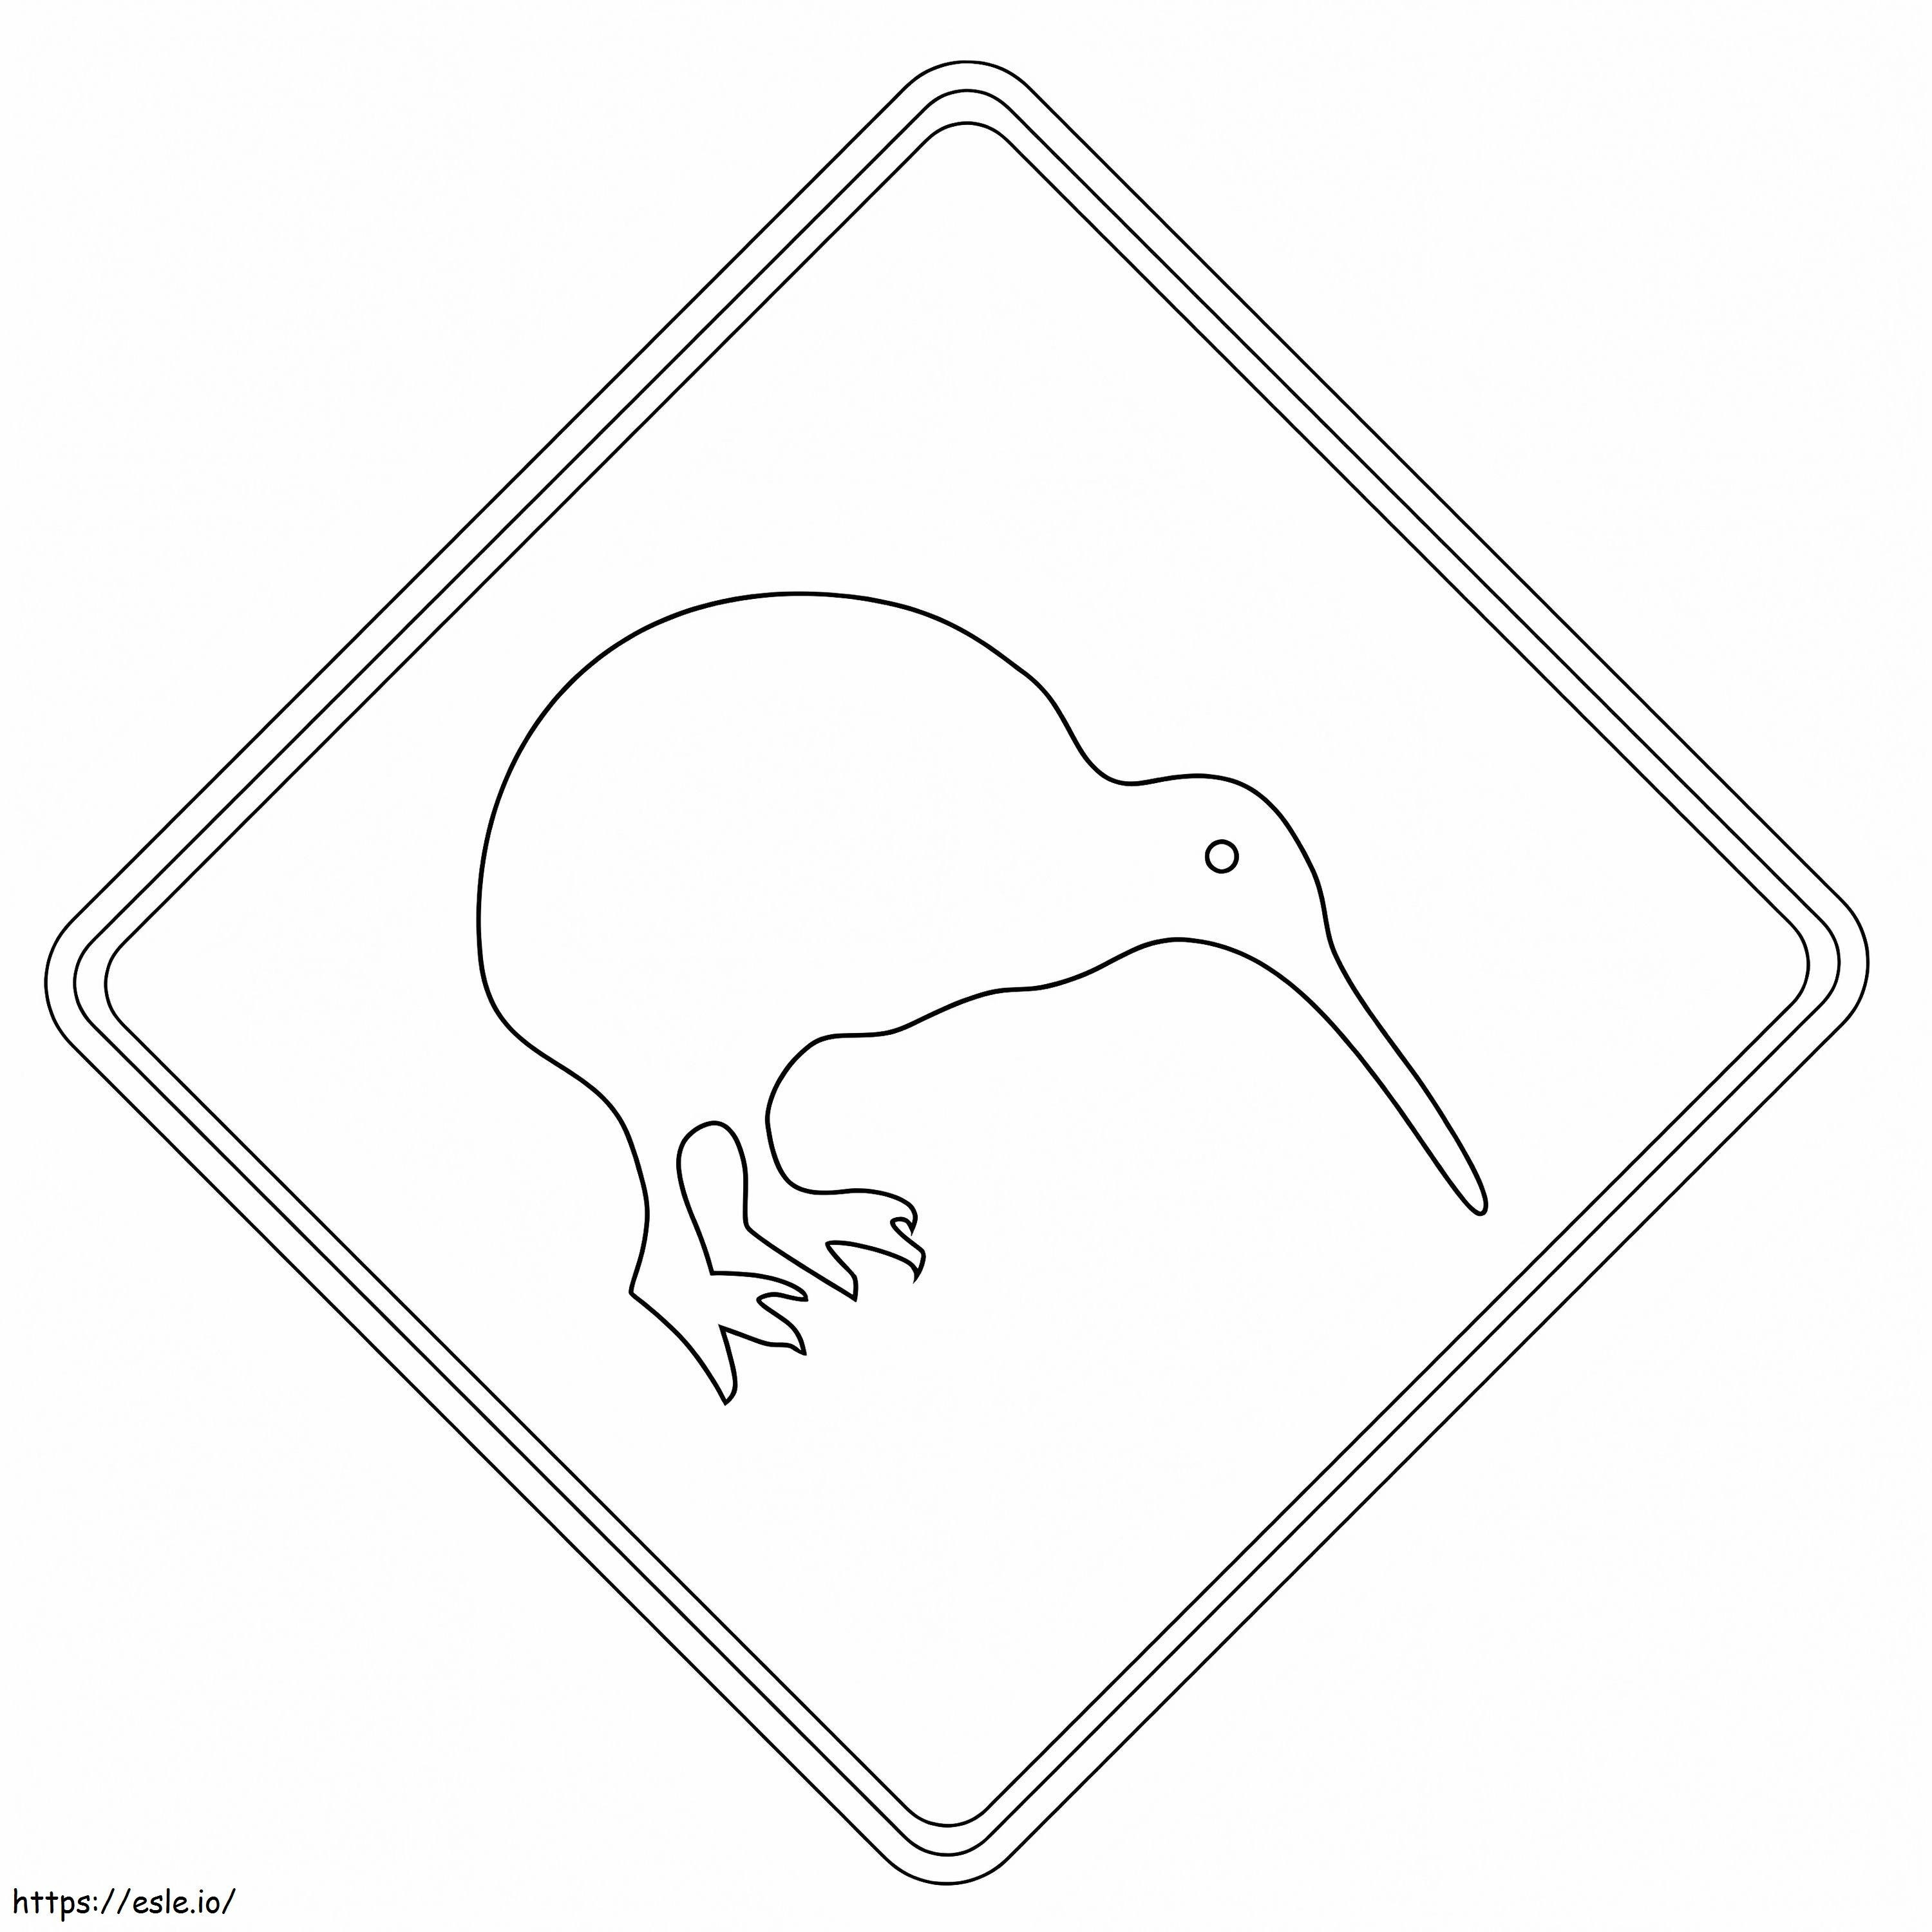 Kiwi Road Sign coloring page